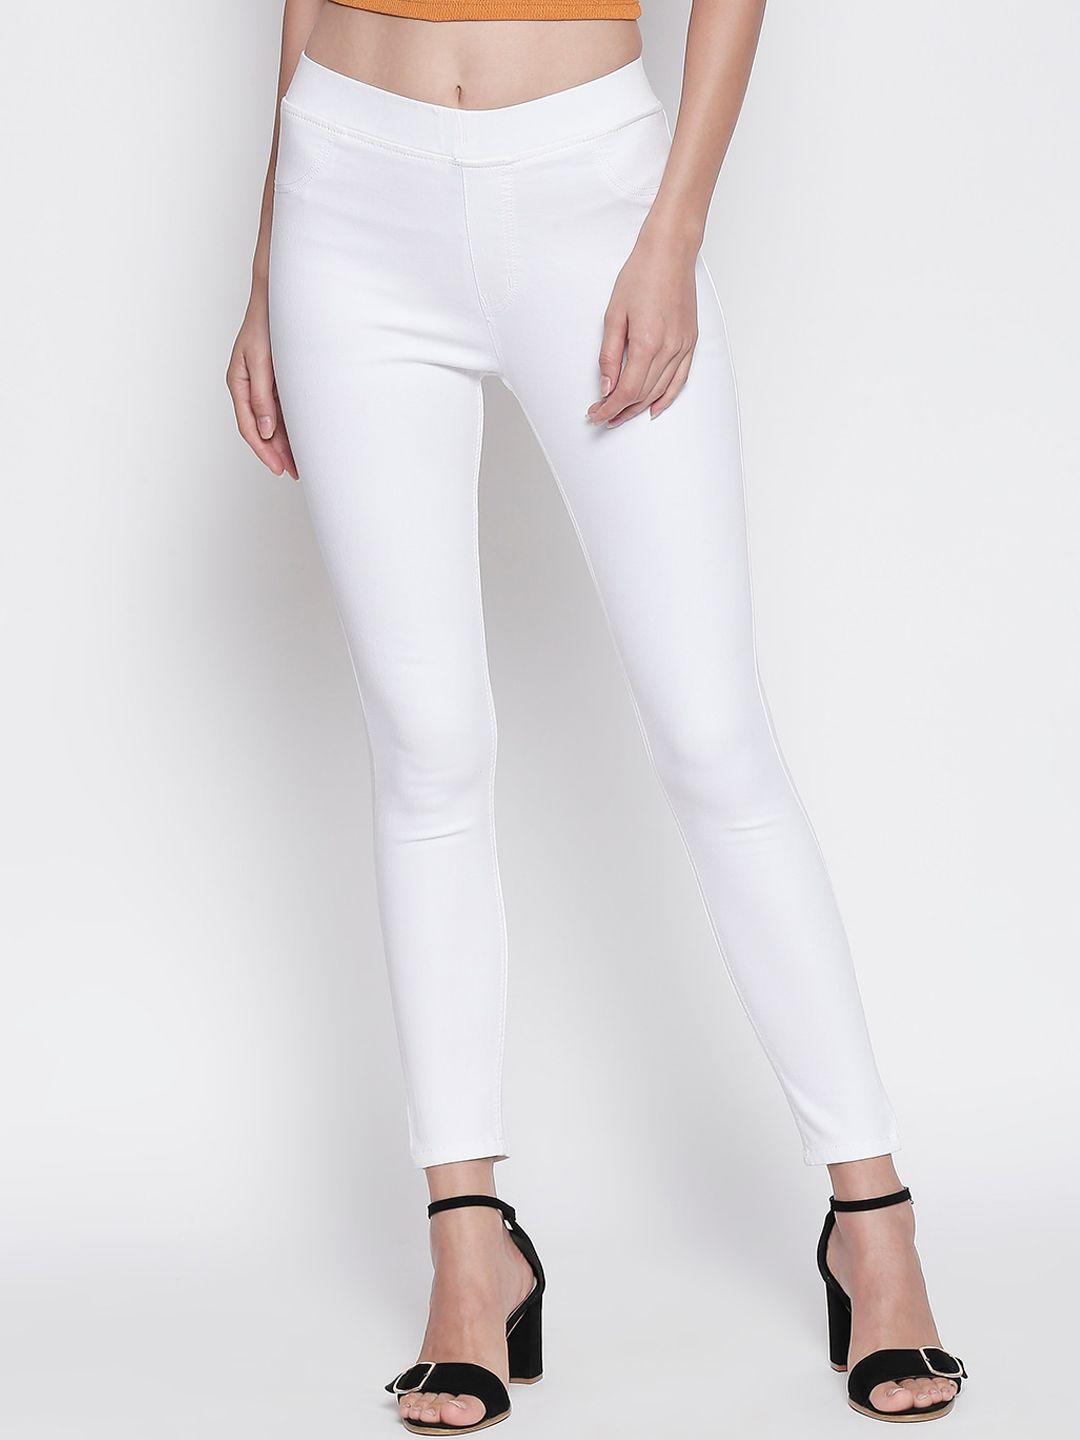 high star women white solid stretchable jeggings